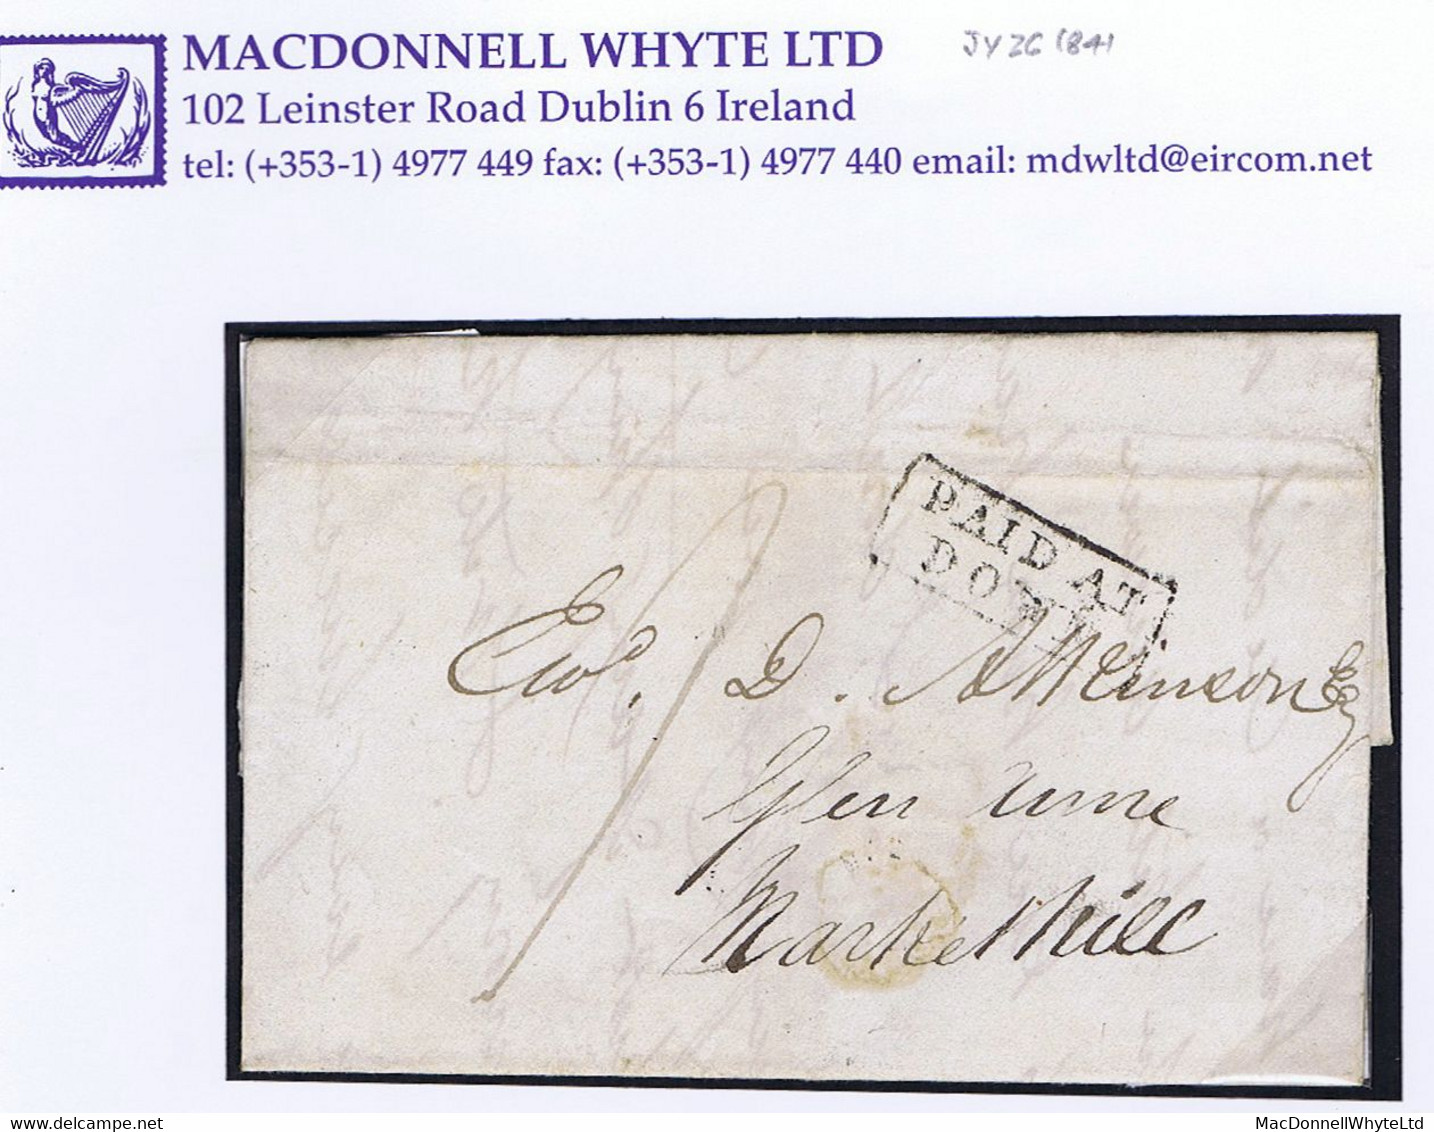 Ireland Down Uniform Penny Post 1841 Letter To Markethill Paid "1" Boxed PAID AT/DOWN, Cds DOWN JY 26 1841 - Vorphilatelie